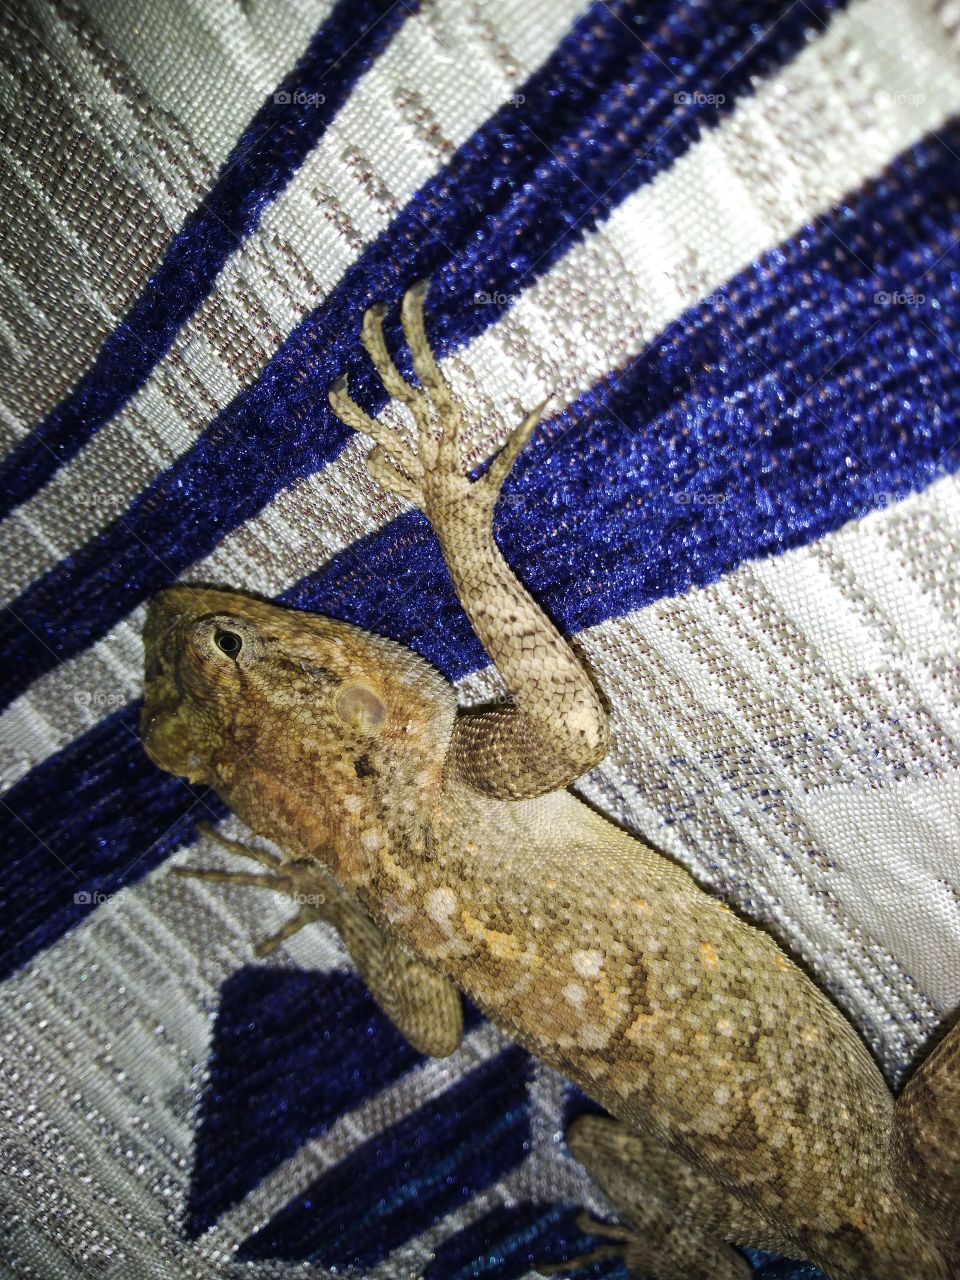 reptile on curtains